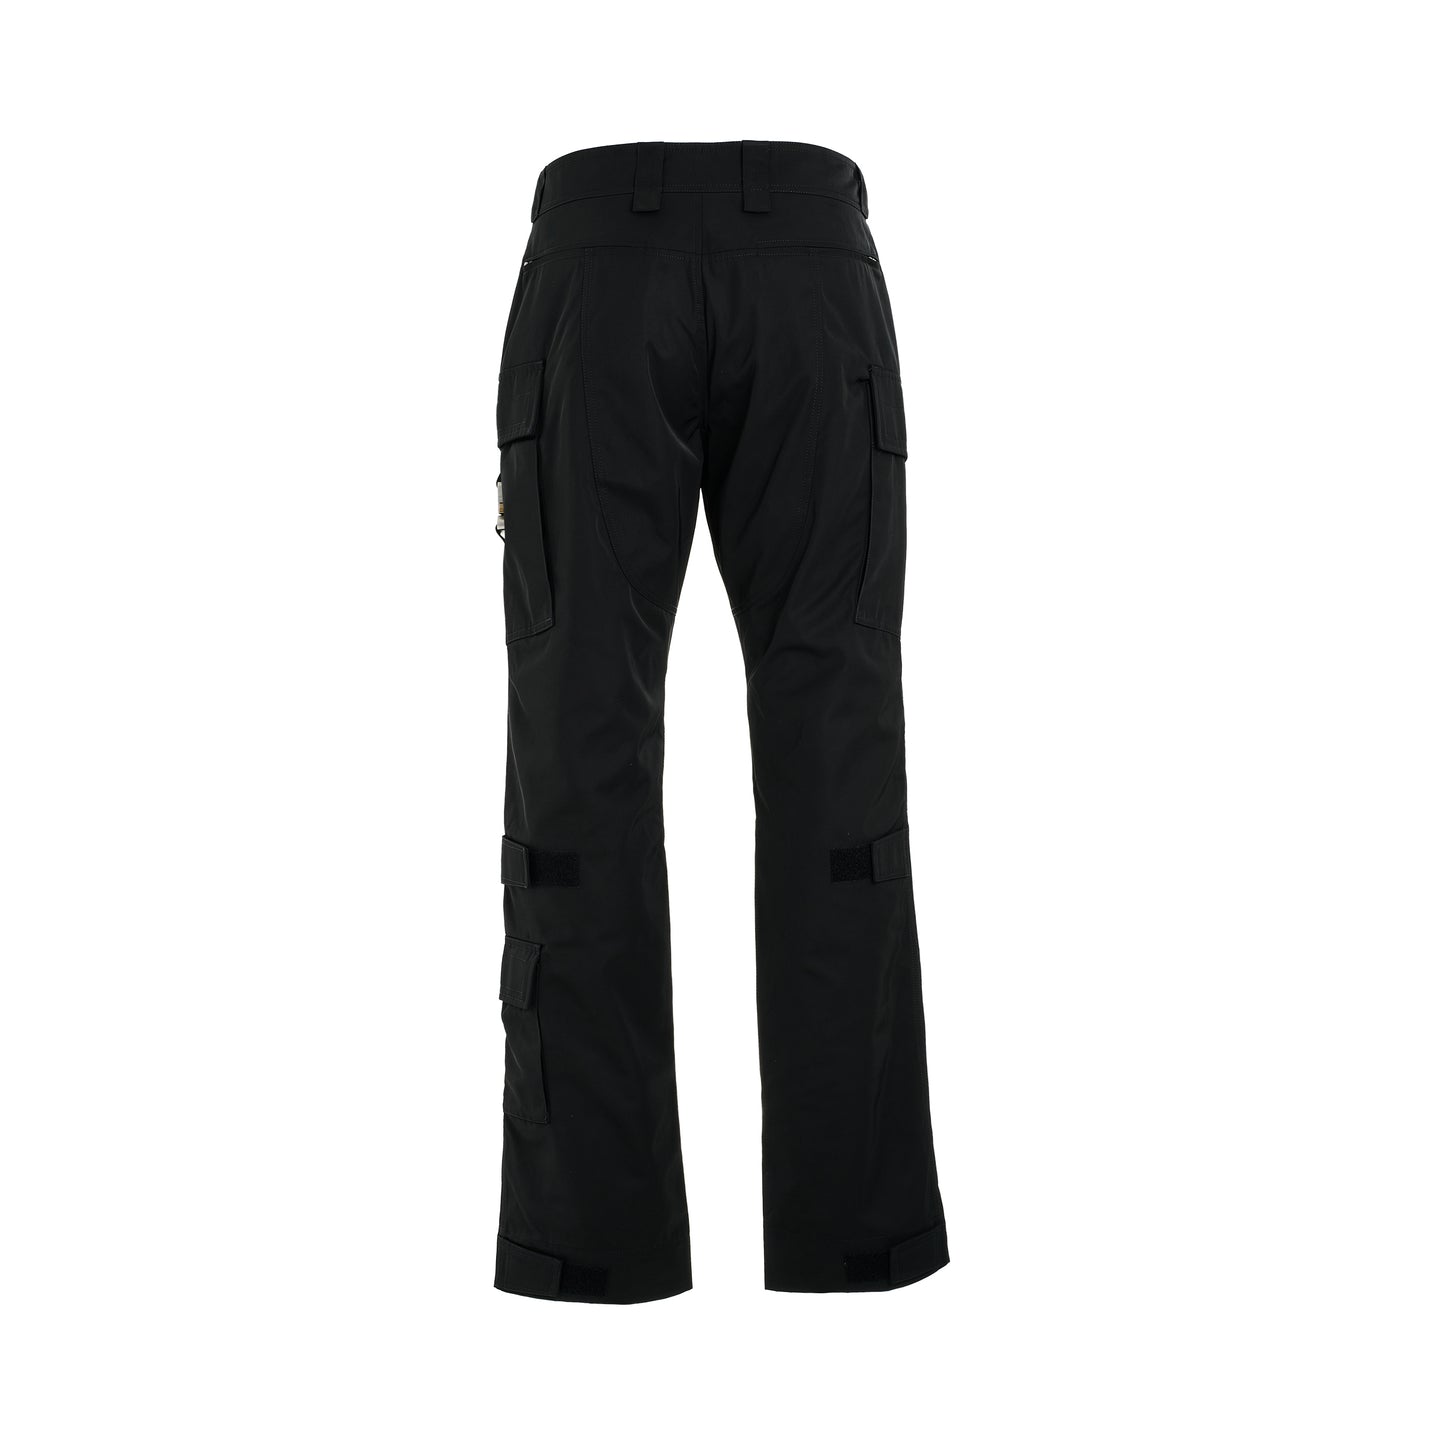 Tactical Pant With Buckle in Black